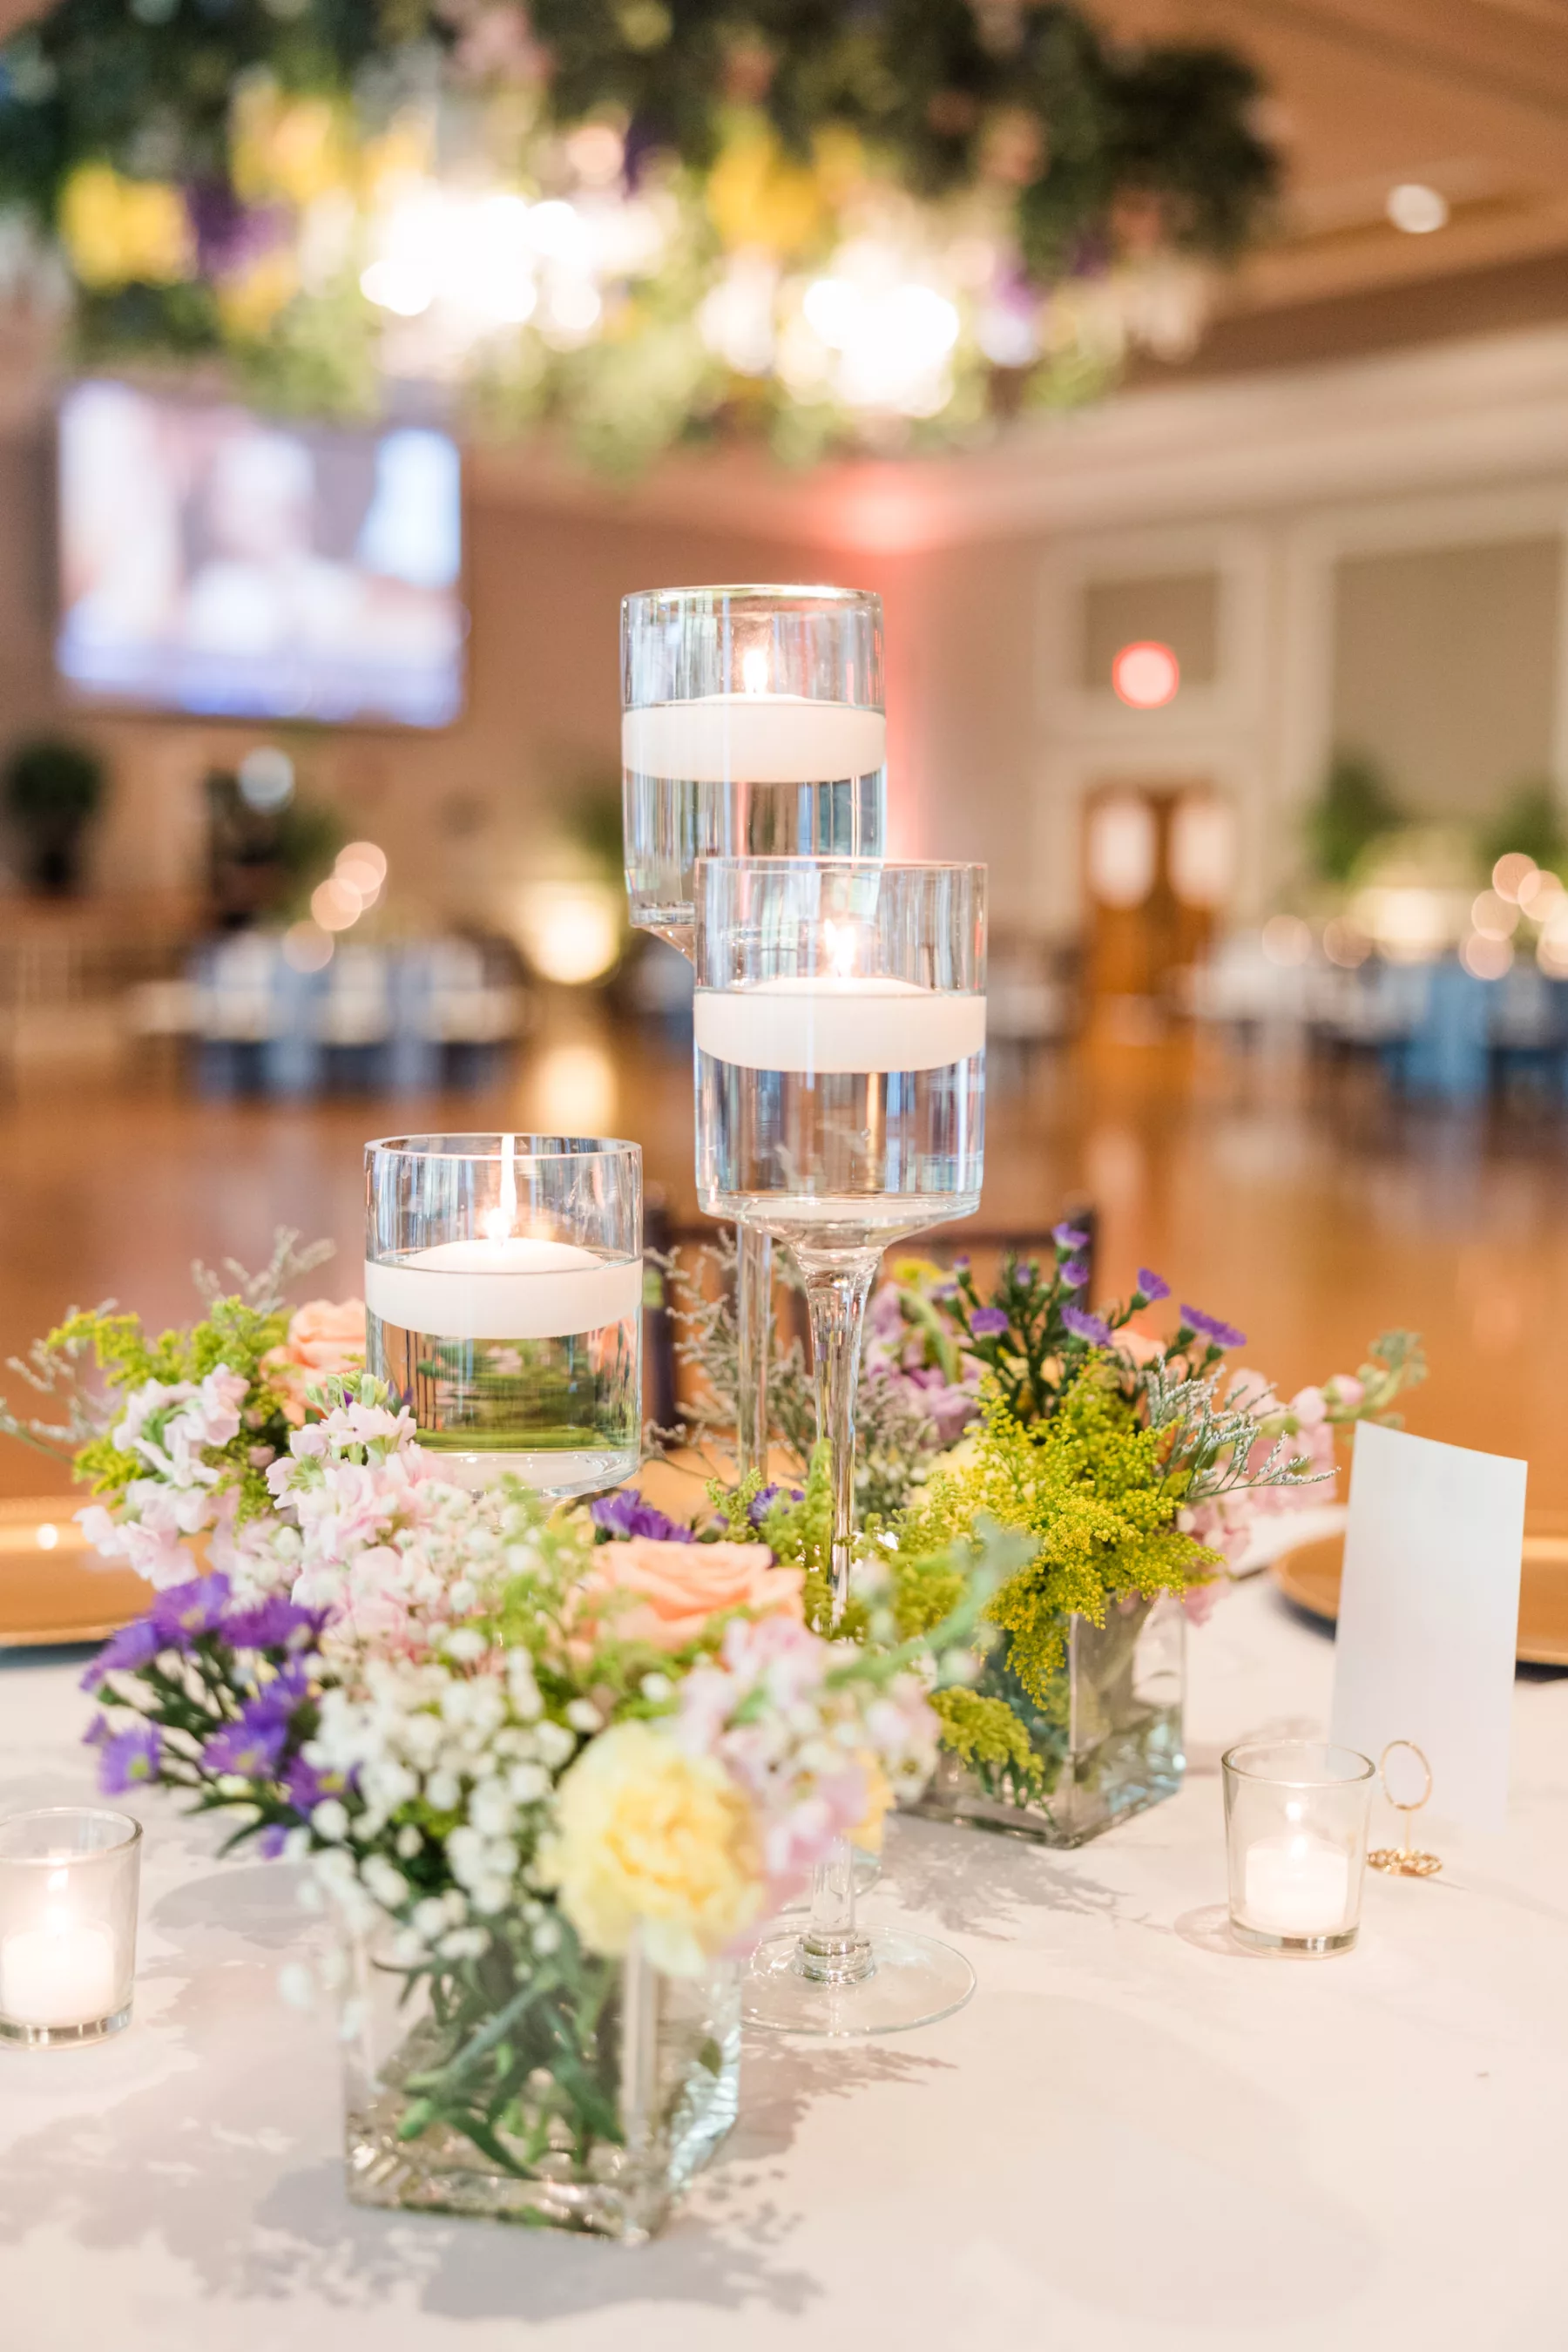 English Garden Inspired Ballroom Wedding Centerpiece Decor Ideas| Floating Candles with Purple Flowers and Baby's Breath in Glass Vase